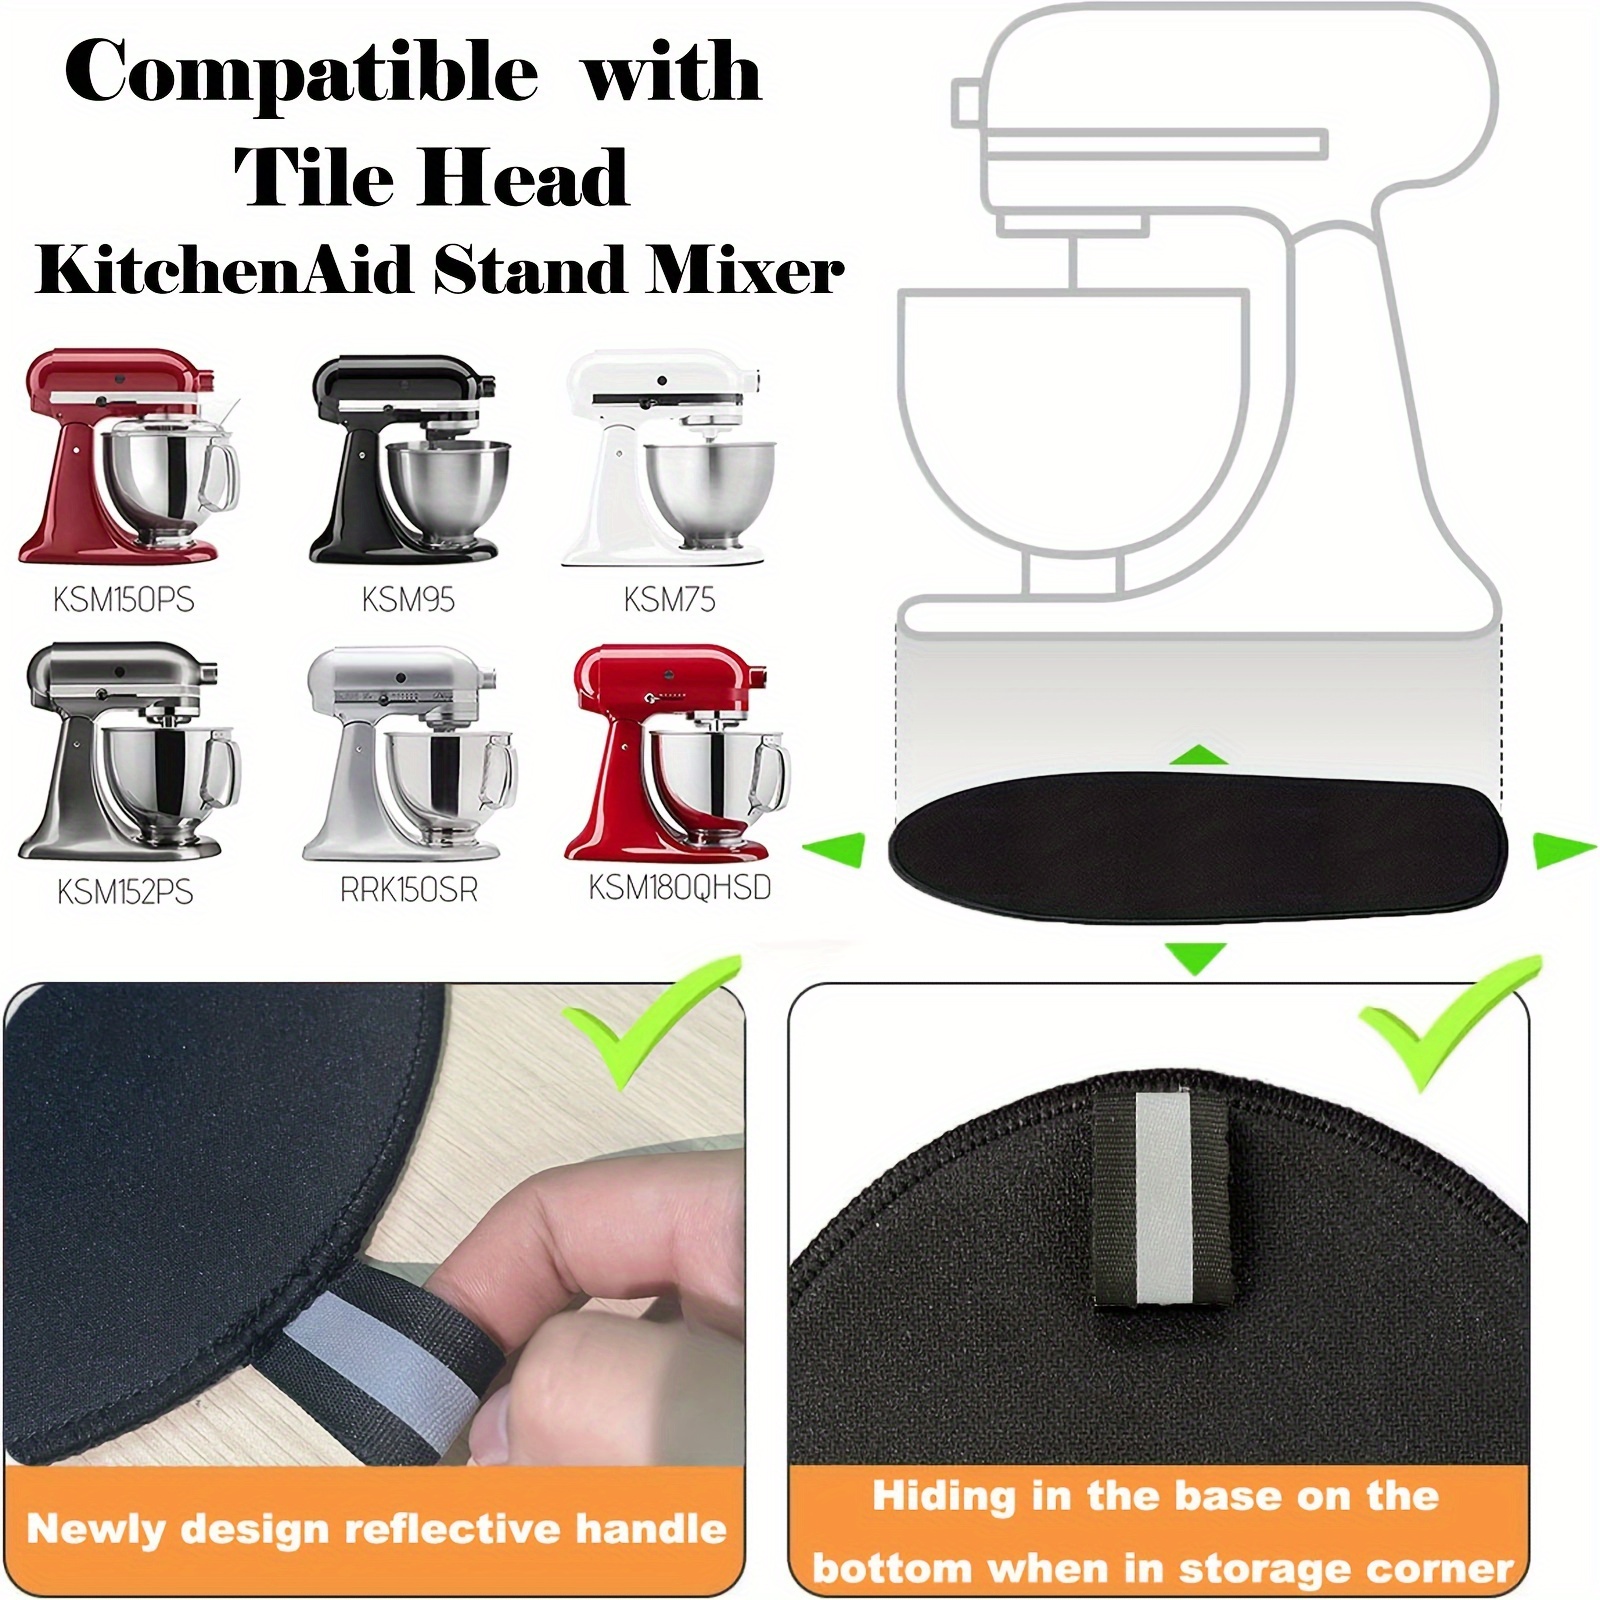  Mixer Mat Slider for KitchenAid 4.5-5 Qt Tilt Head Stand Mixer  - Bamboo Kitchen Appliance Sliding Tray Mixer Mover Slider Board Compatible  with Kitchen aid 4.5-5 Qt Stand Mixer, KitchenAid Artisan